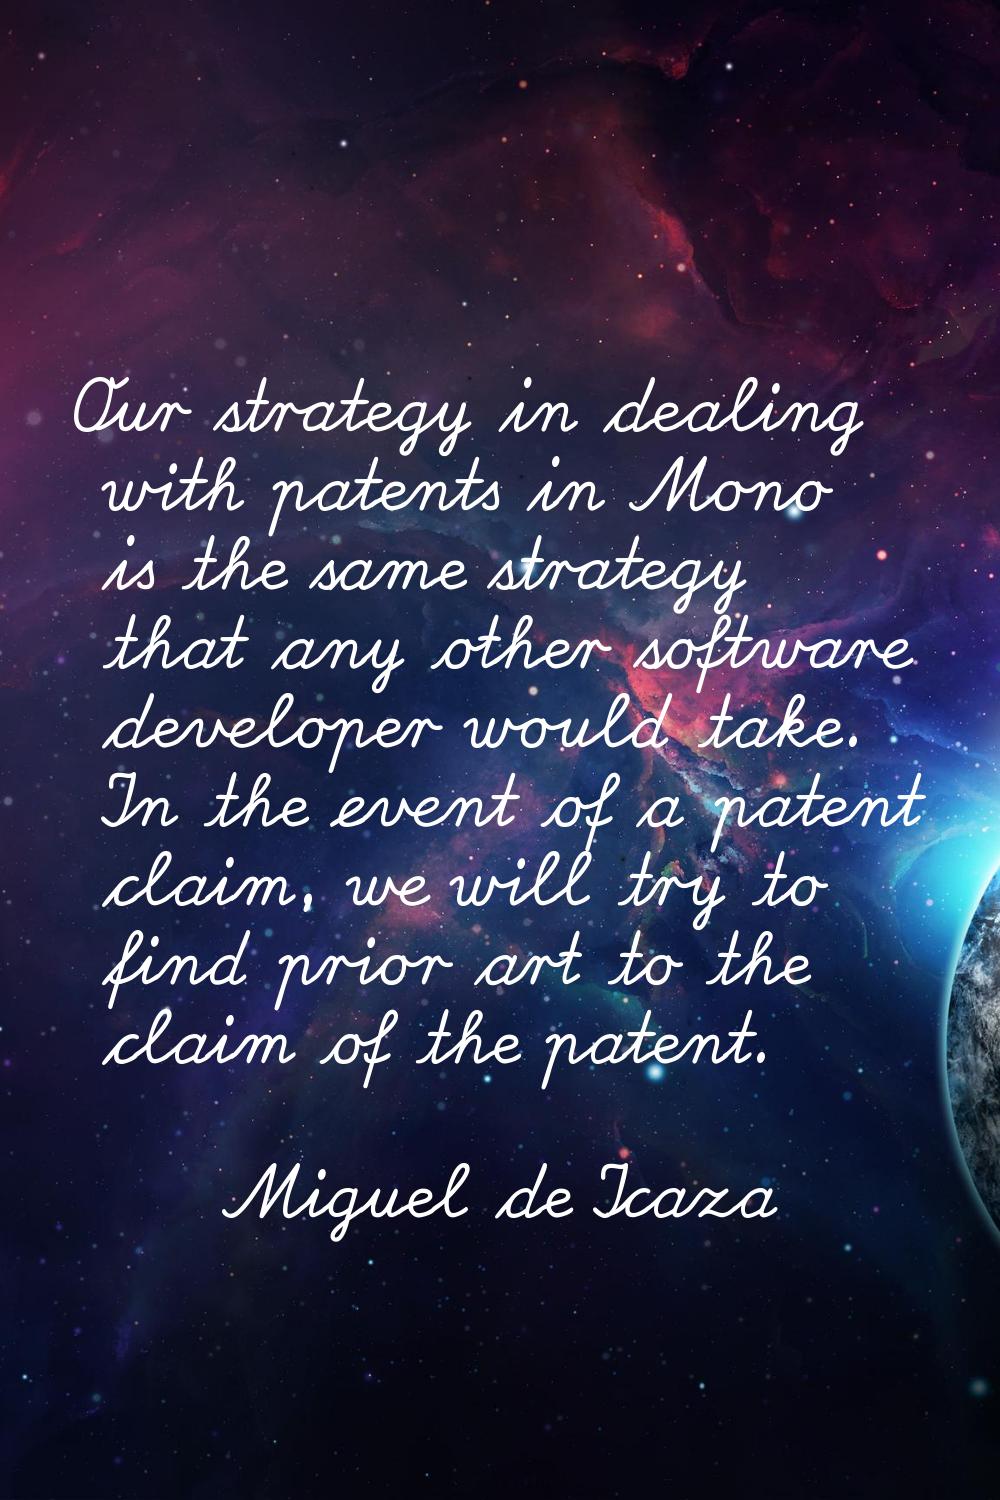 Our strategy in dealing with patents in Mono is the same strategy that any other software developer